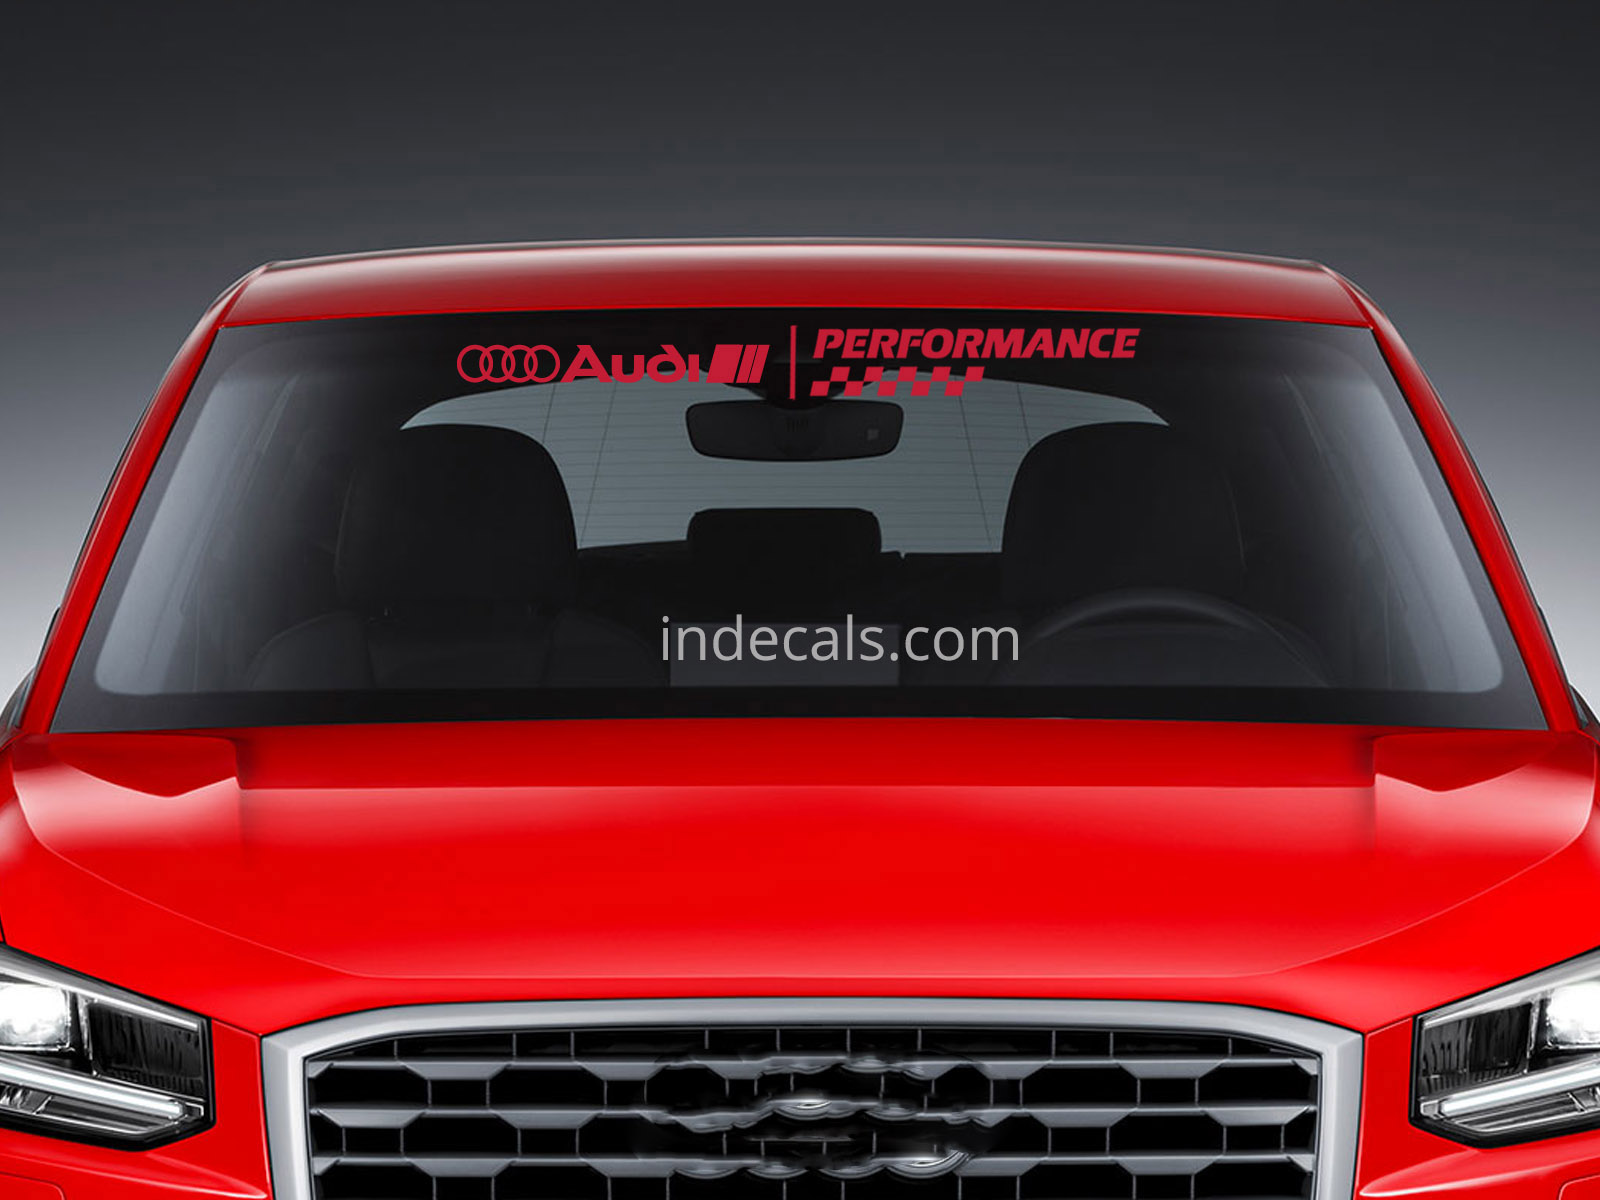 1 x Audi Performance Sticker for Windshield or Back Window - Red 